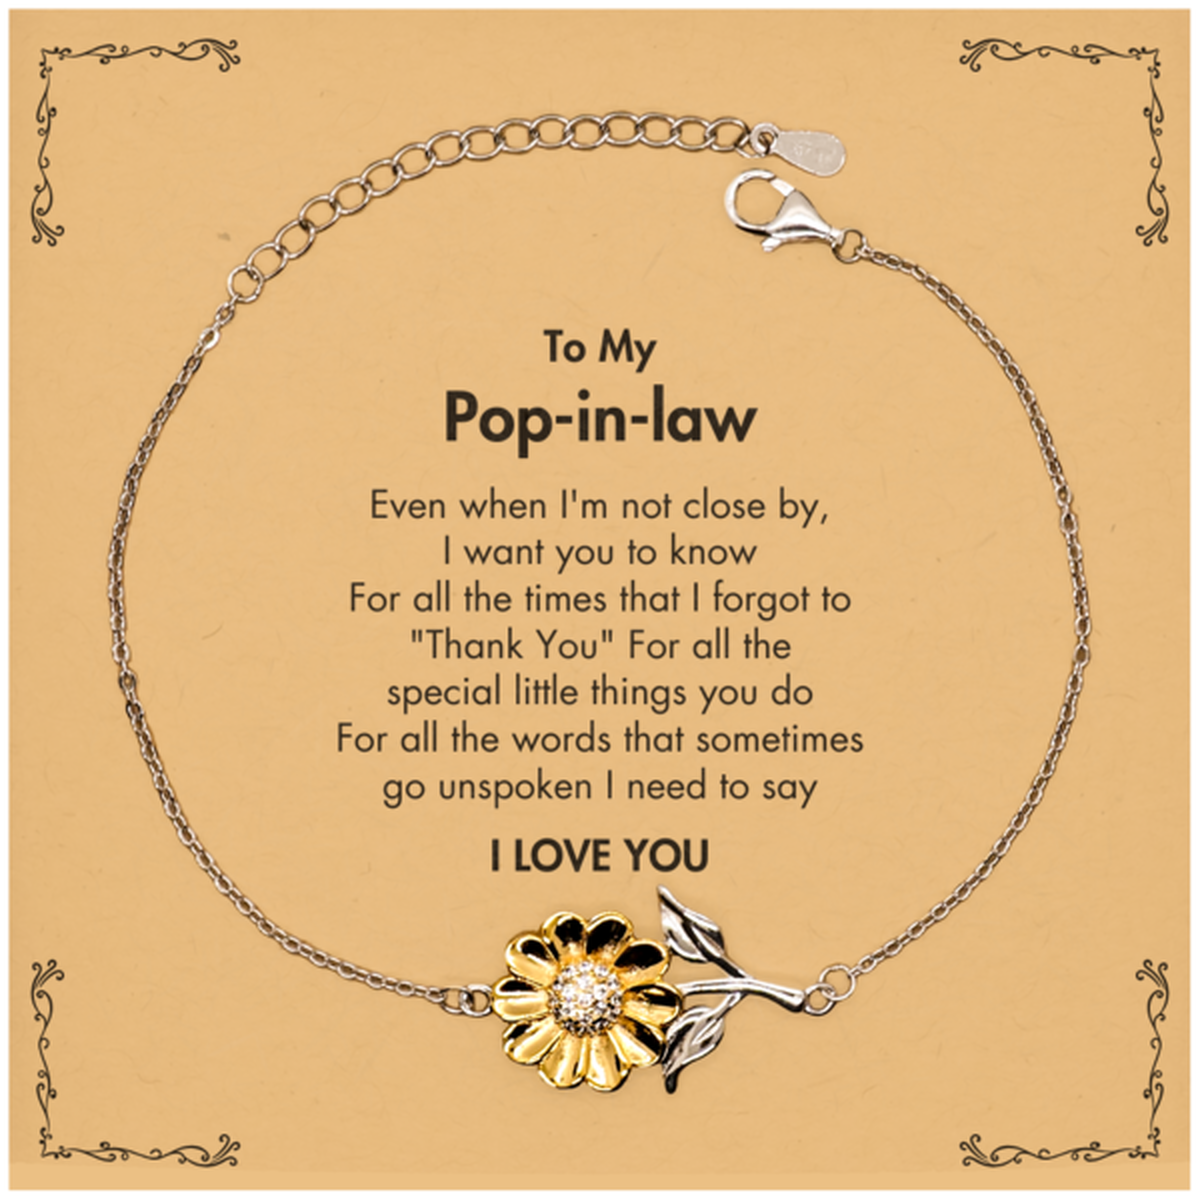 Thank You Gifts for Pop-in-law, Keepsake Sunflower Bracelet Gifts for Pop-in-law Birthday Mother's day Father's Day Pop-in-law For all the words That sometimes go unspoken I need to say I LOVE YOU